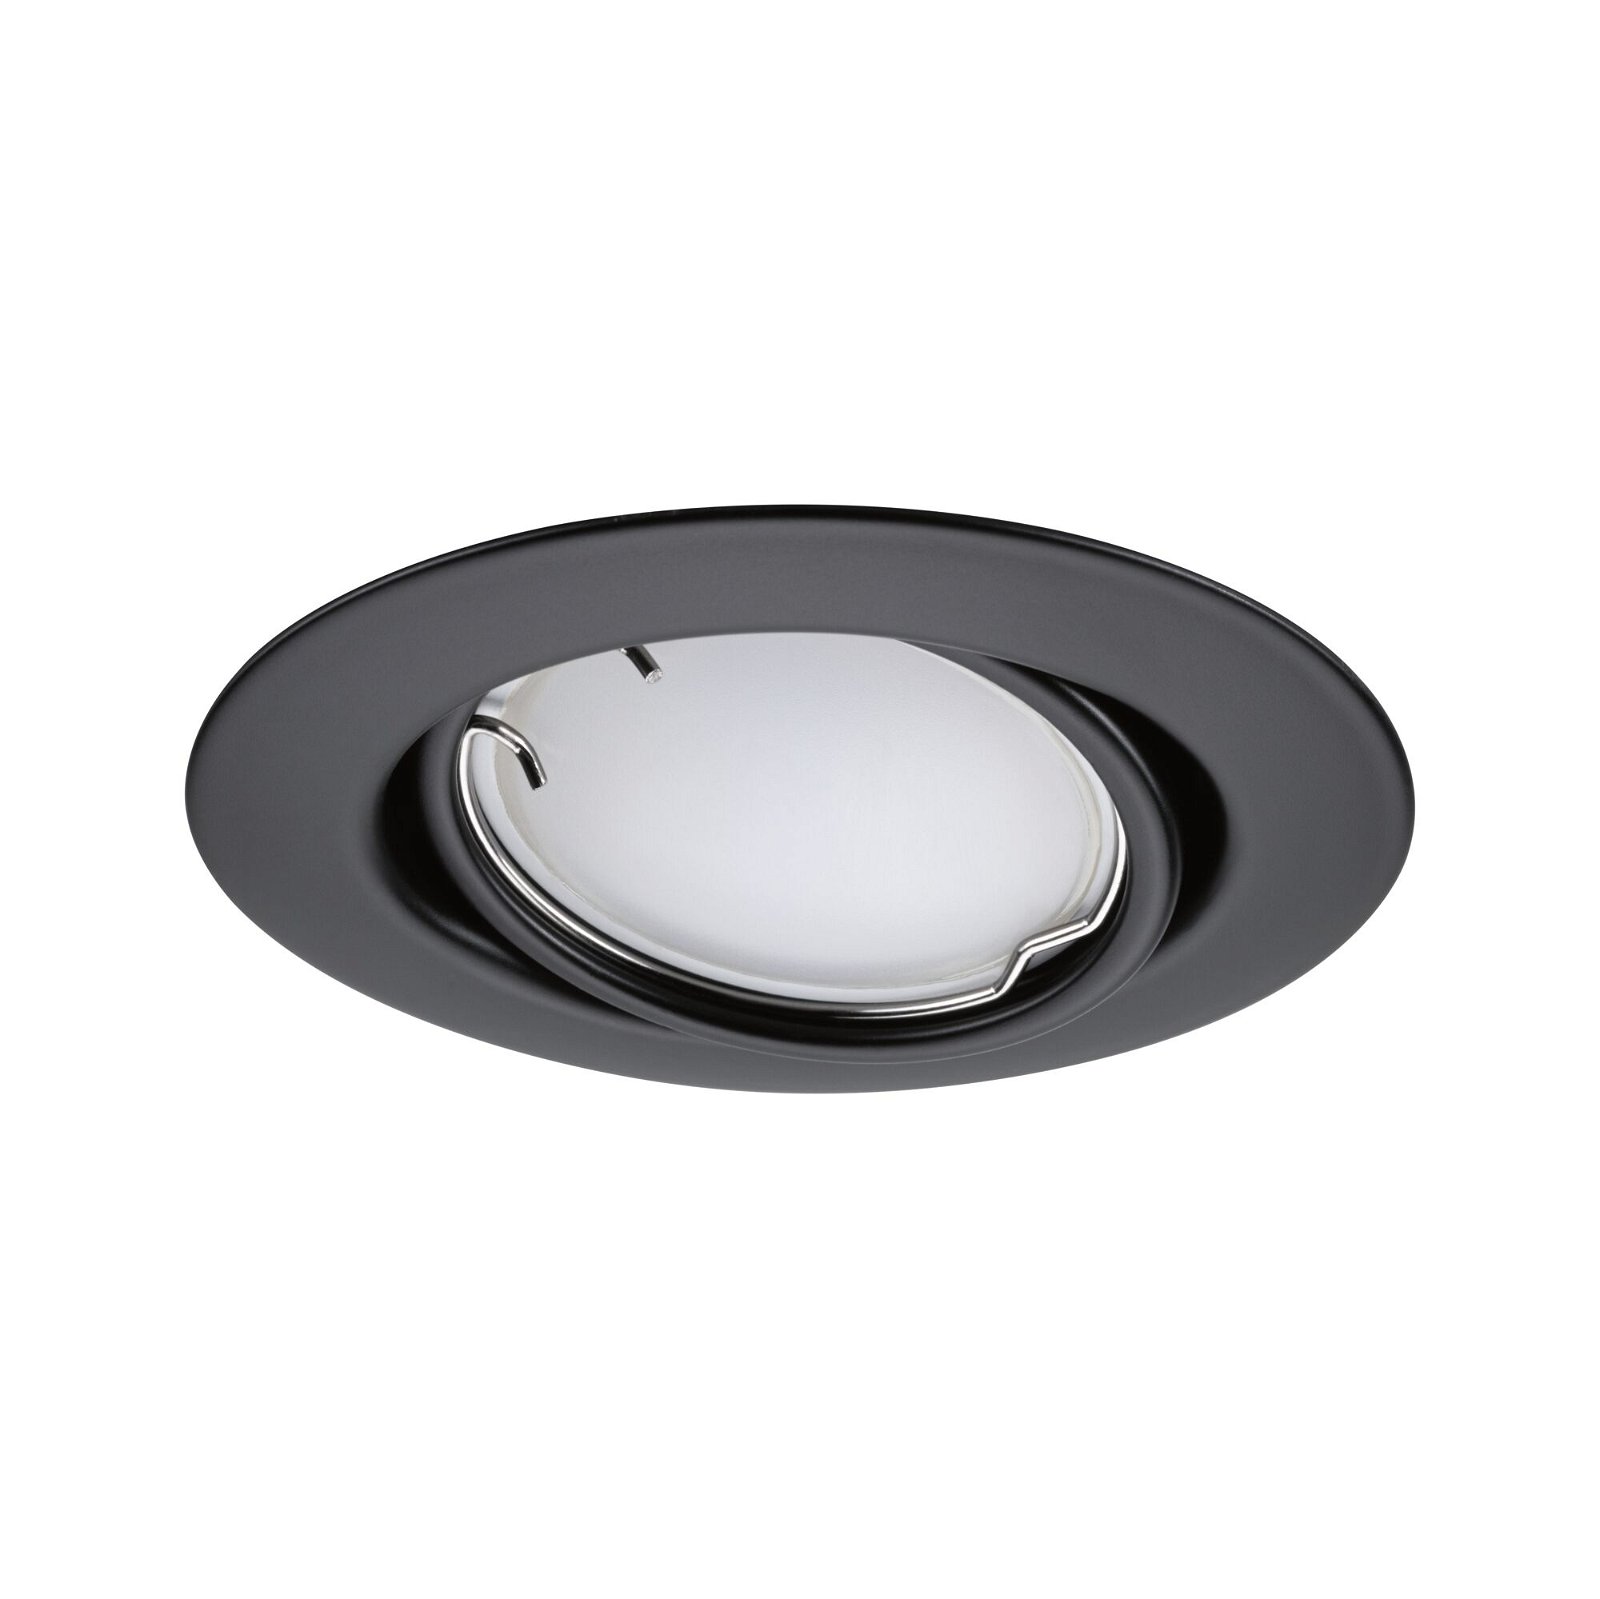 LED Recessed luminaire Smart Home Zigbee 3.0 Base Coin Basic Set Swivelling round 90mm 20° 3x4,9W 3x420lm 230V dimmable RGBW+ Black matt